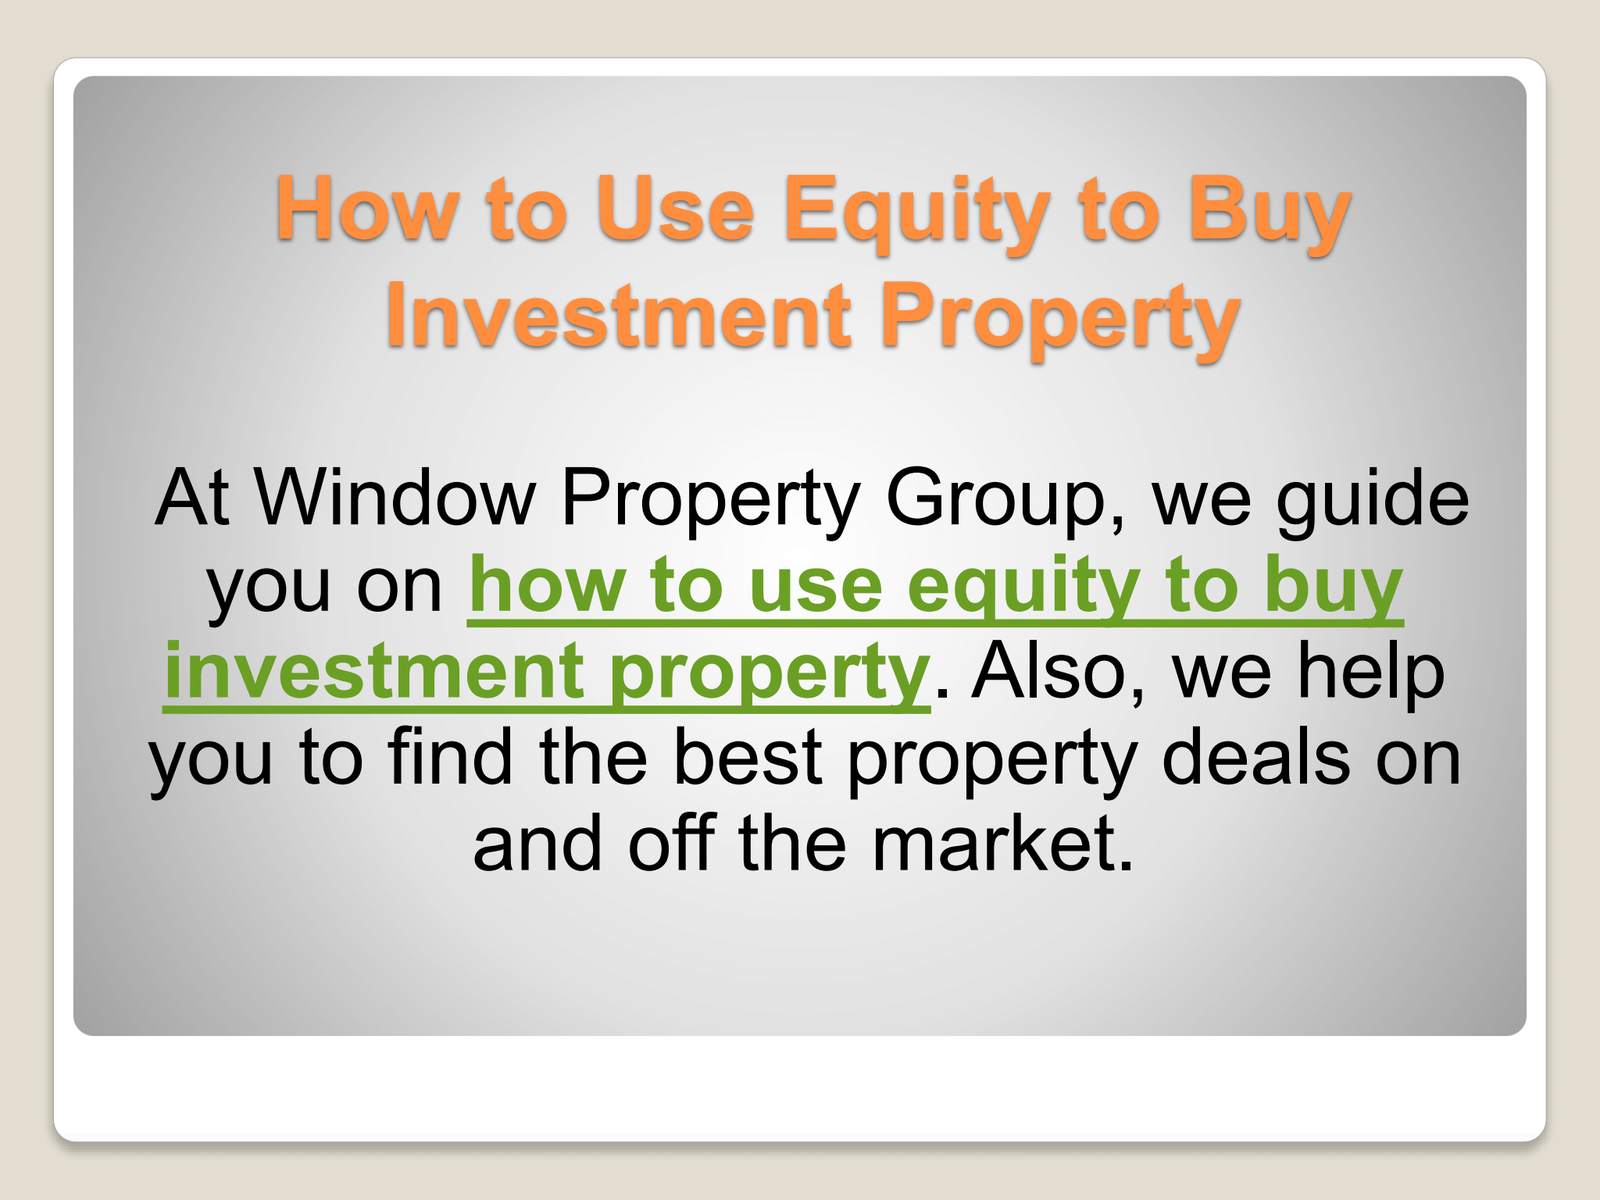 Dropbox - How to Use Equity to Buy Investment Property.pptx